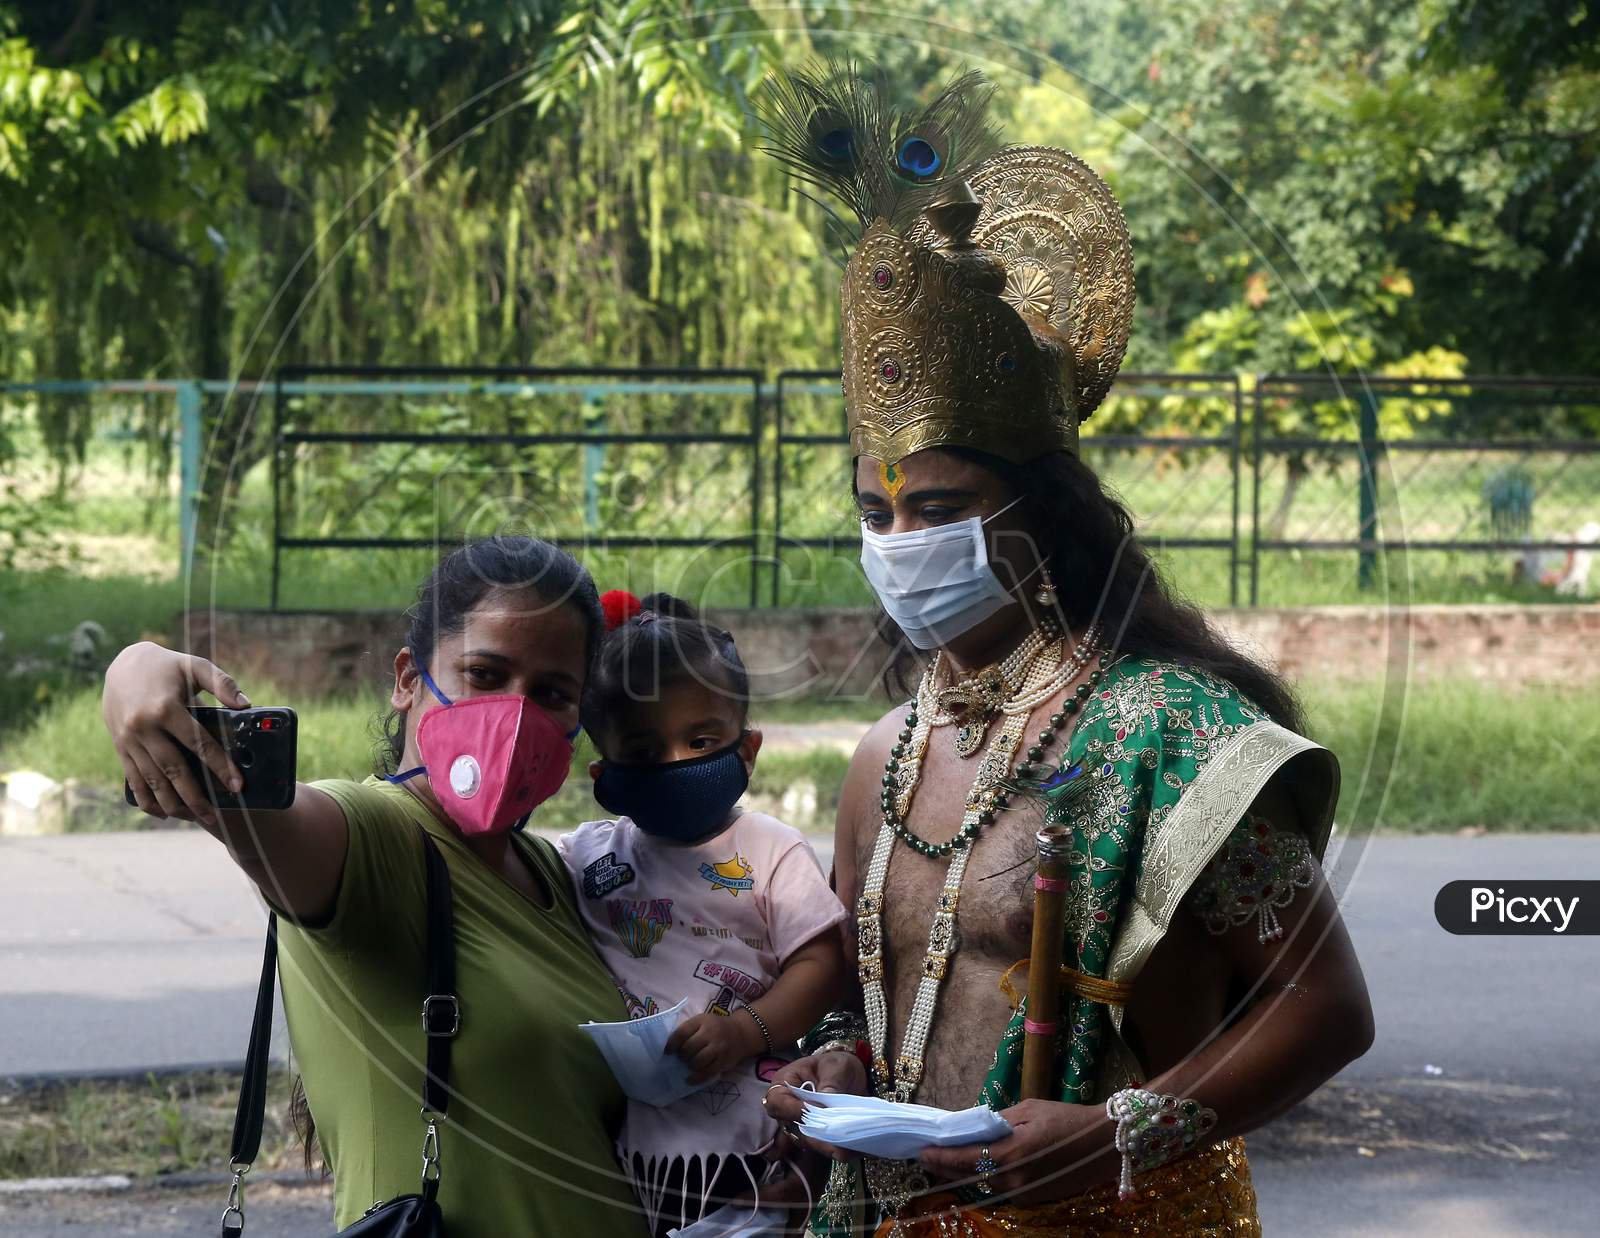 A woman takes selfie as a man dressed as Hindu Lord Krishna distributes masks to people at a road during Janmashtami celebrations, in Chandigarh August 11, 2020